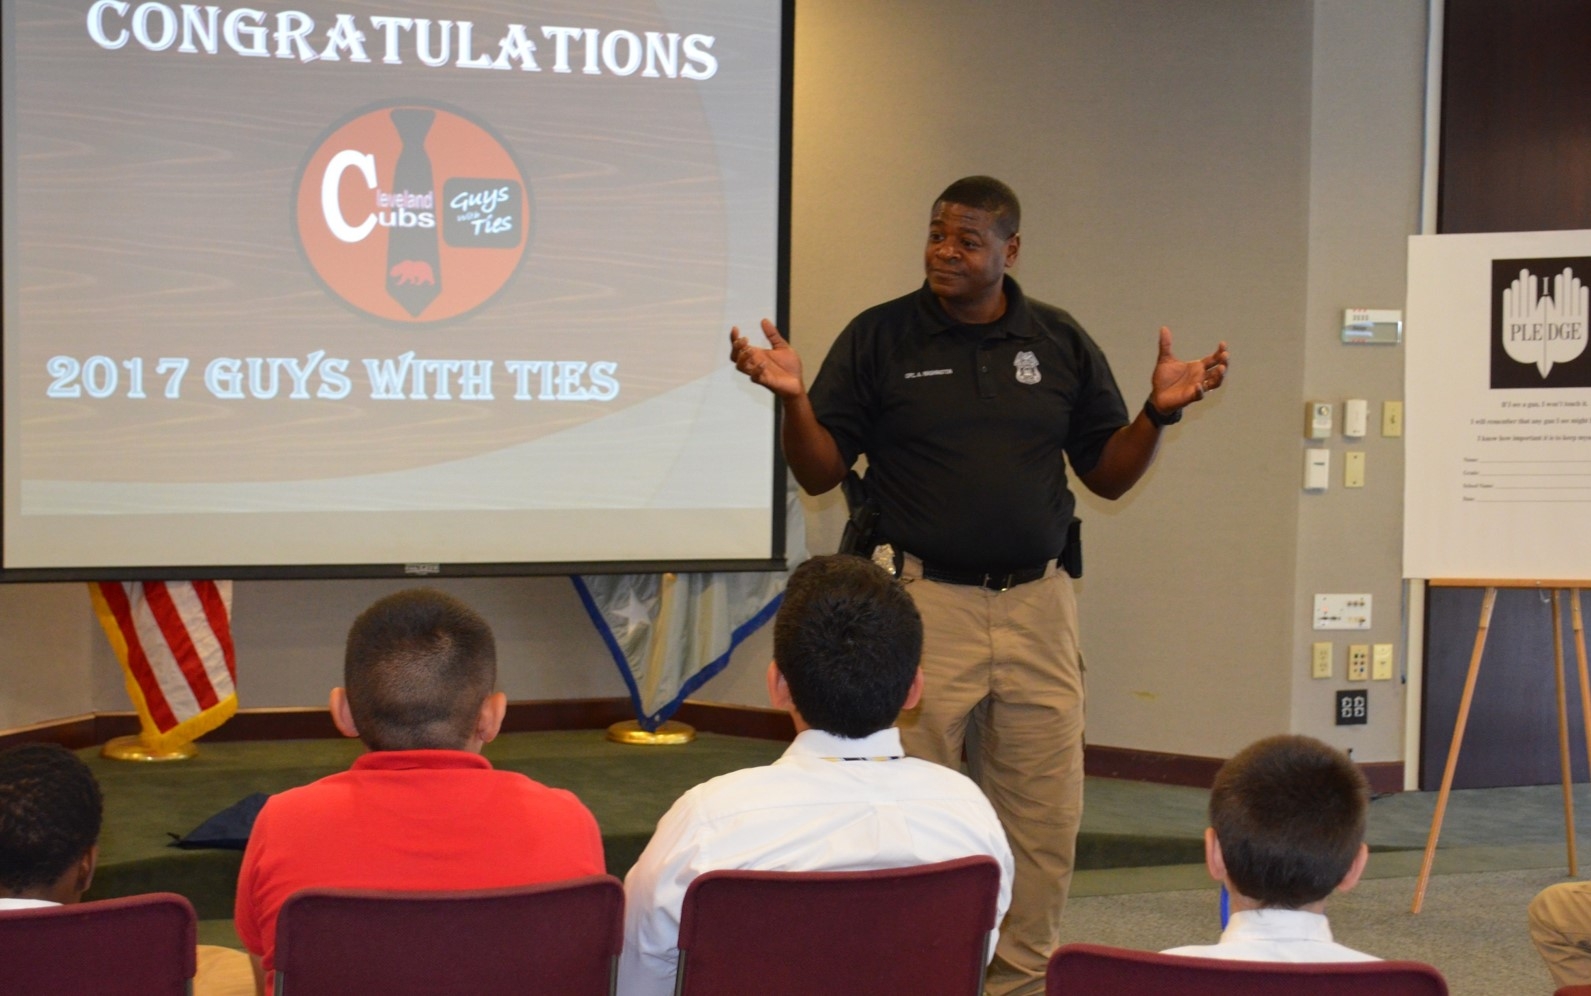 Ofc. Washington from Tampa PD talks about seeing your best self